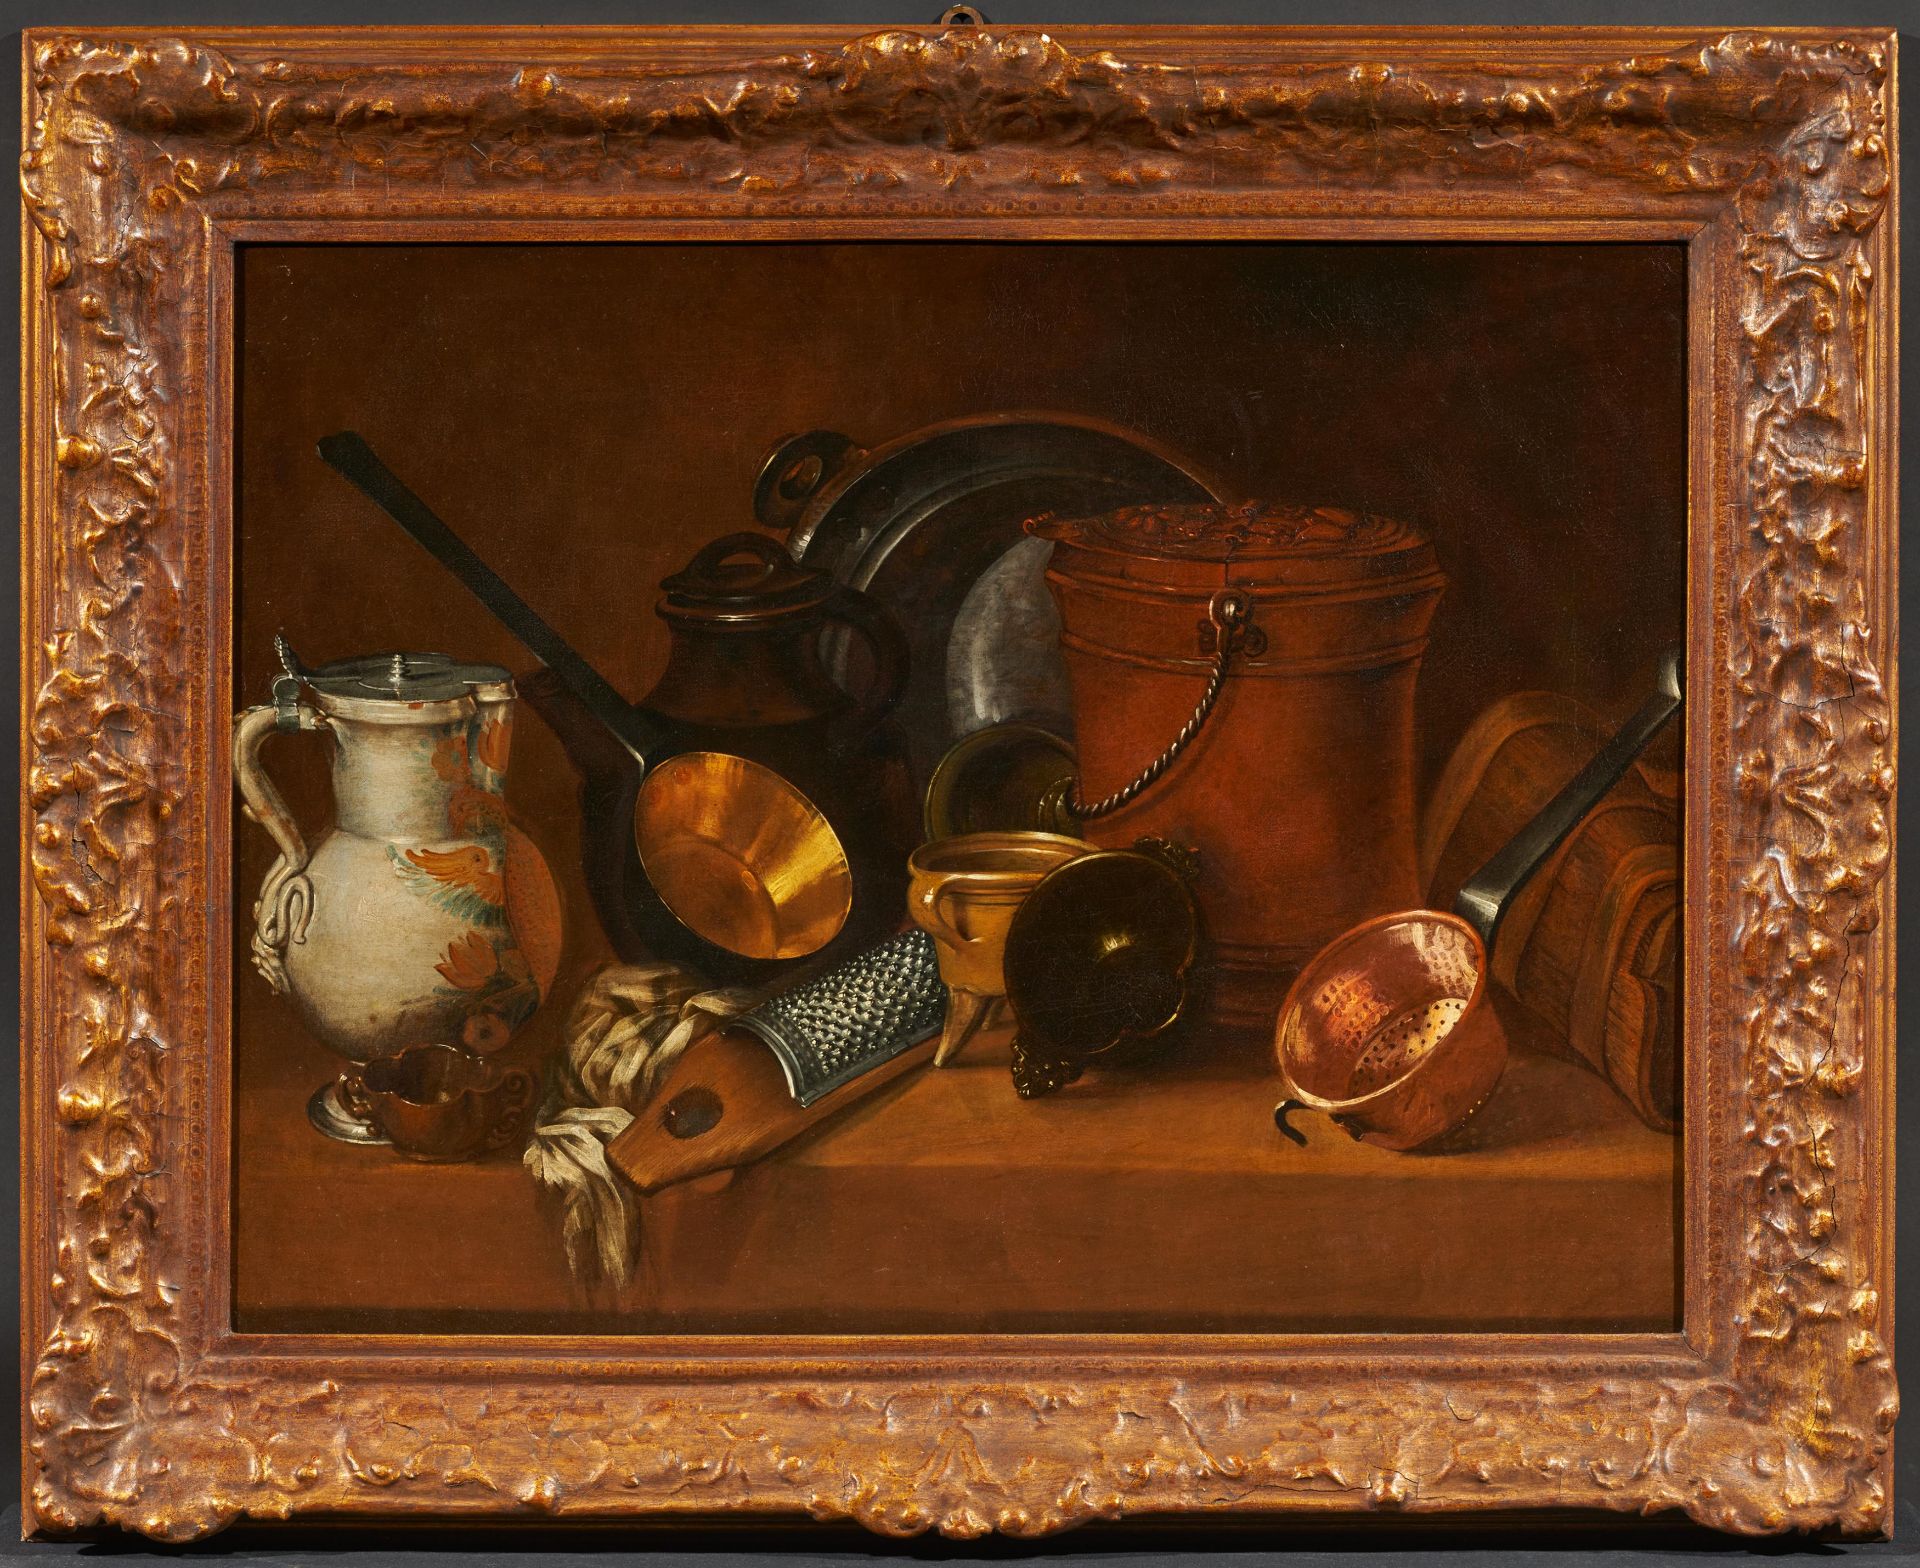 French School: Kitchen Still Life with Pots and Jugs - Image 2 of 4